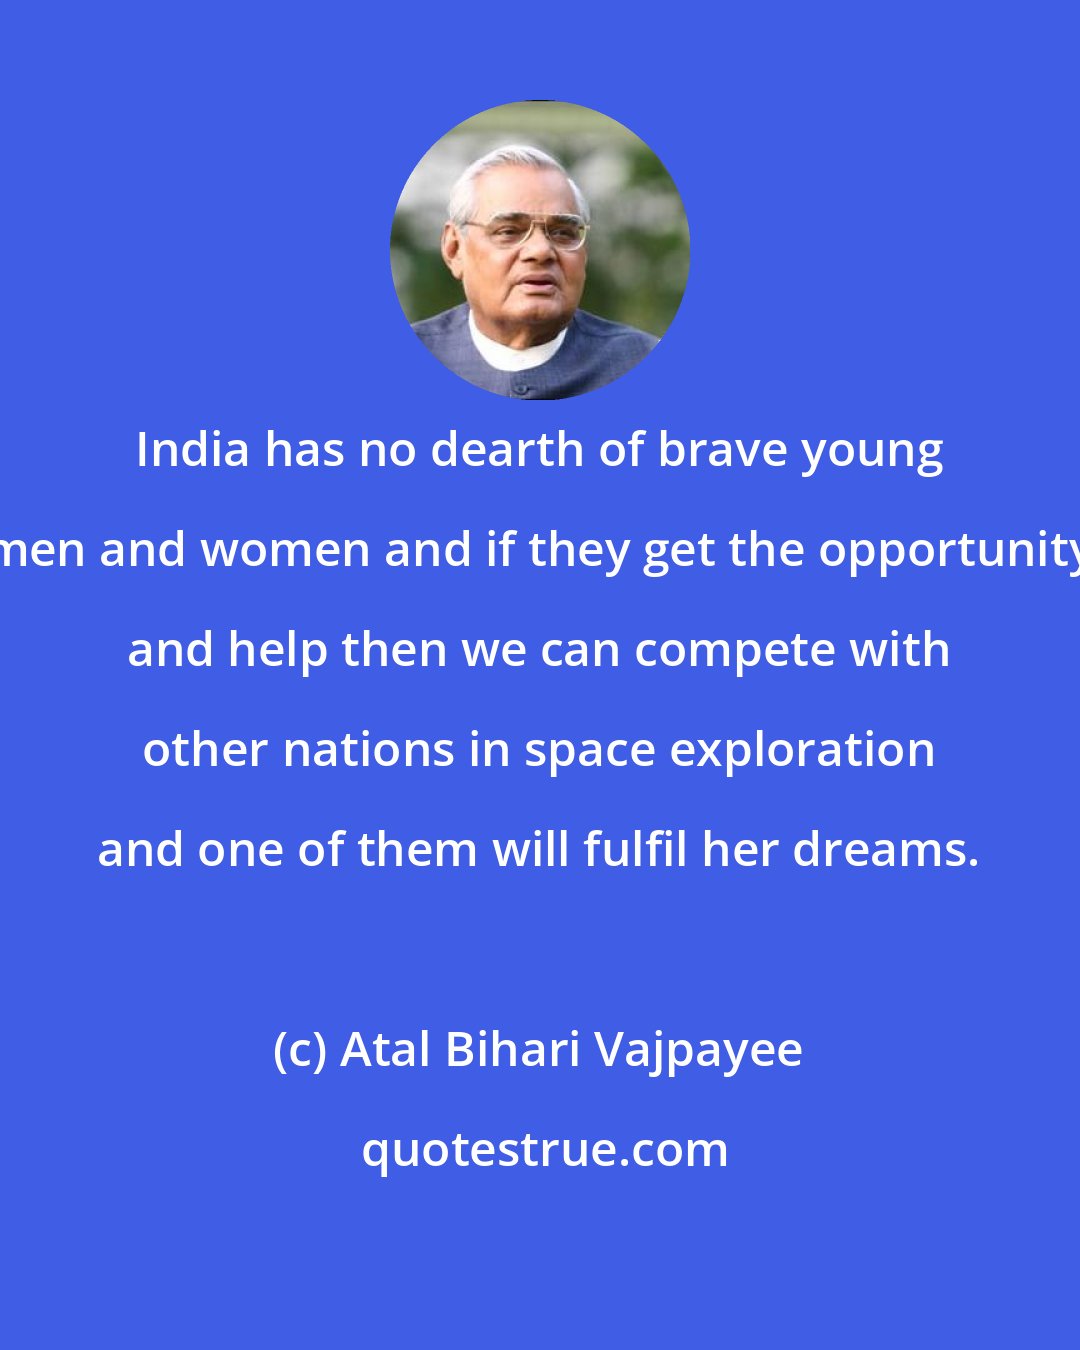 Atal Bihari Vajpayee: India has no dearth of brave young men and women and if they get the opportunity and help then we can compete with other nations in space exploration and one of them will fulfil her dreams.